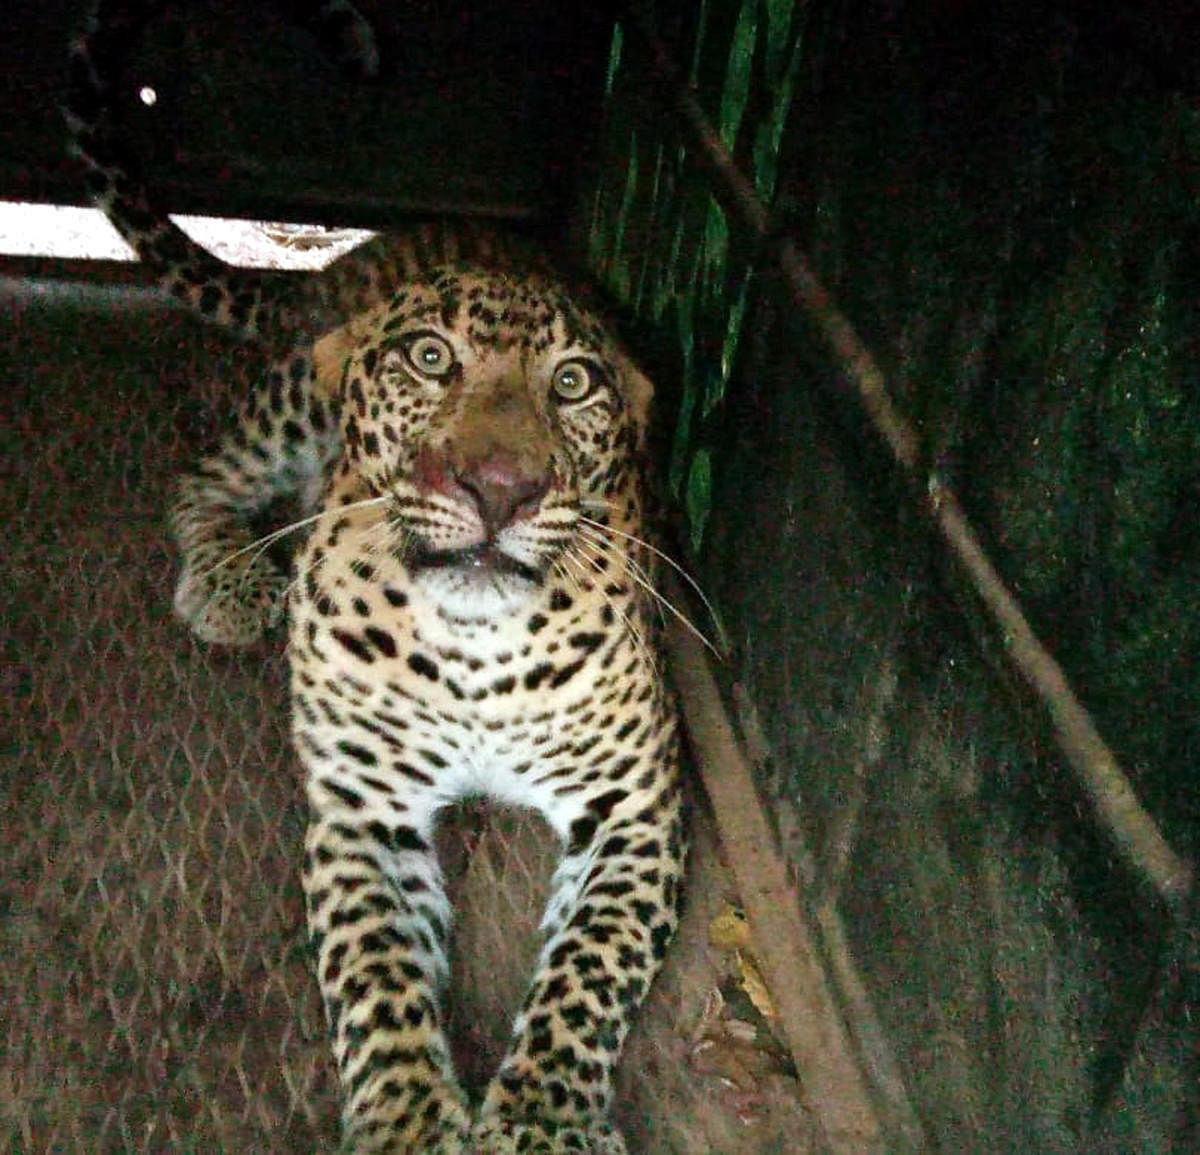 Leopard caught, released into forest